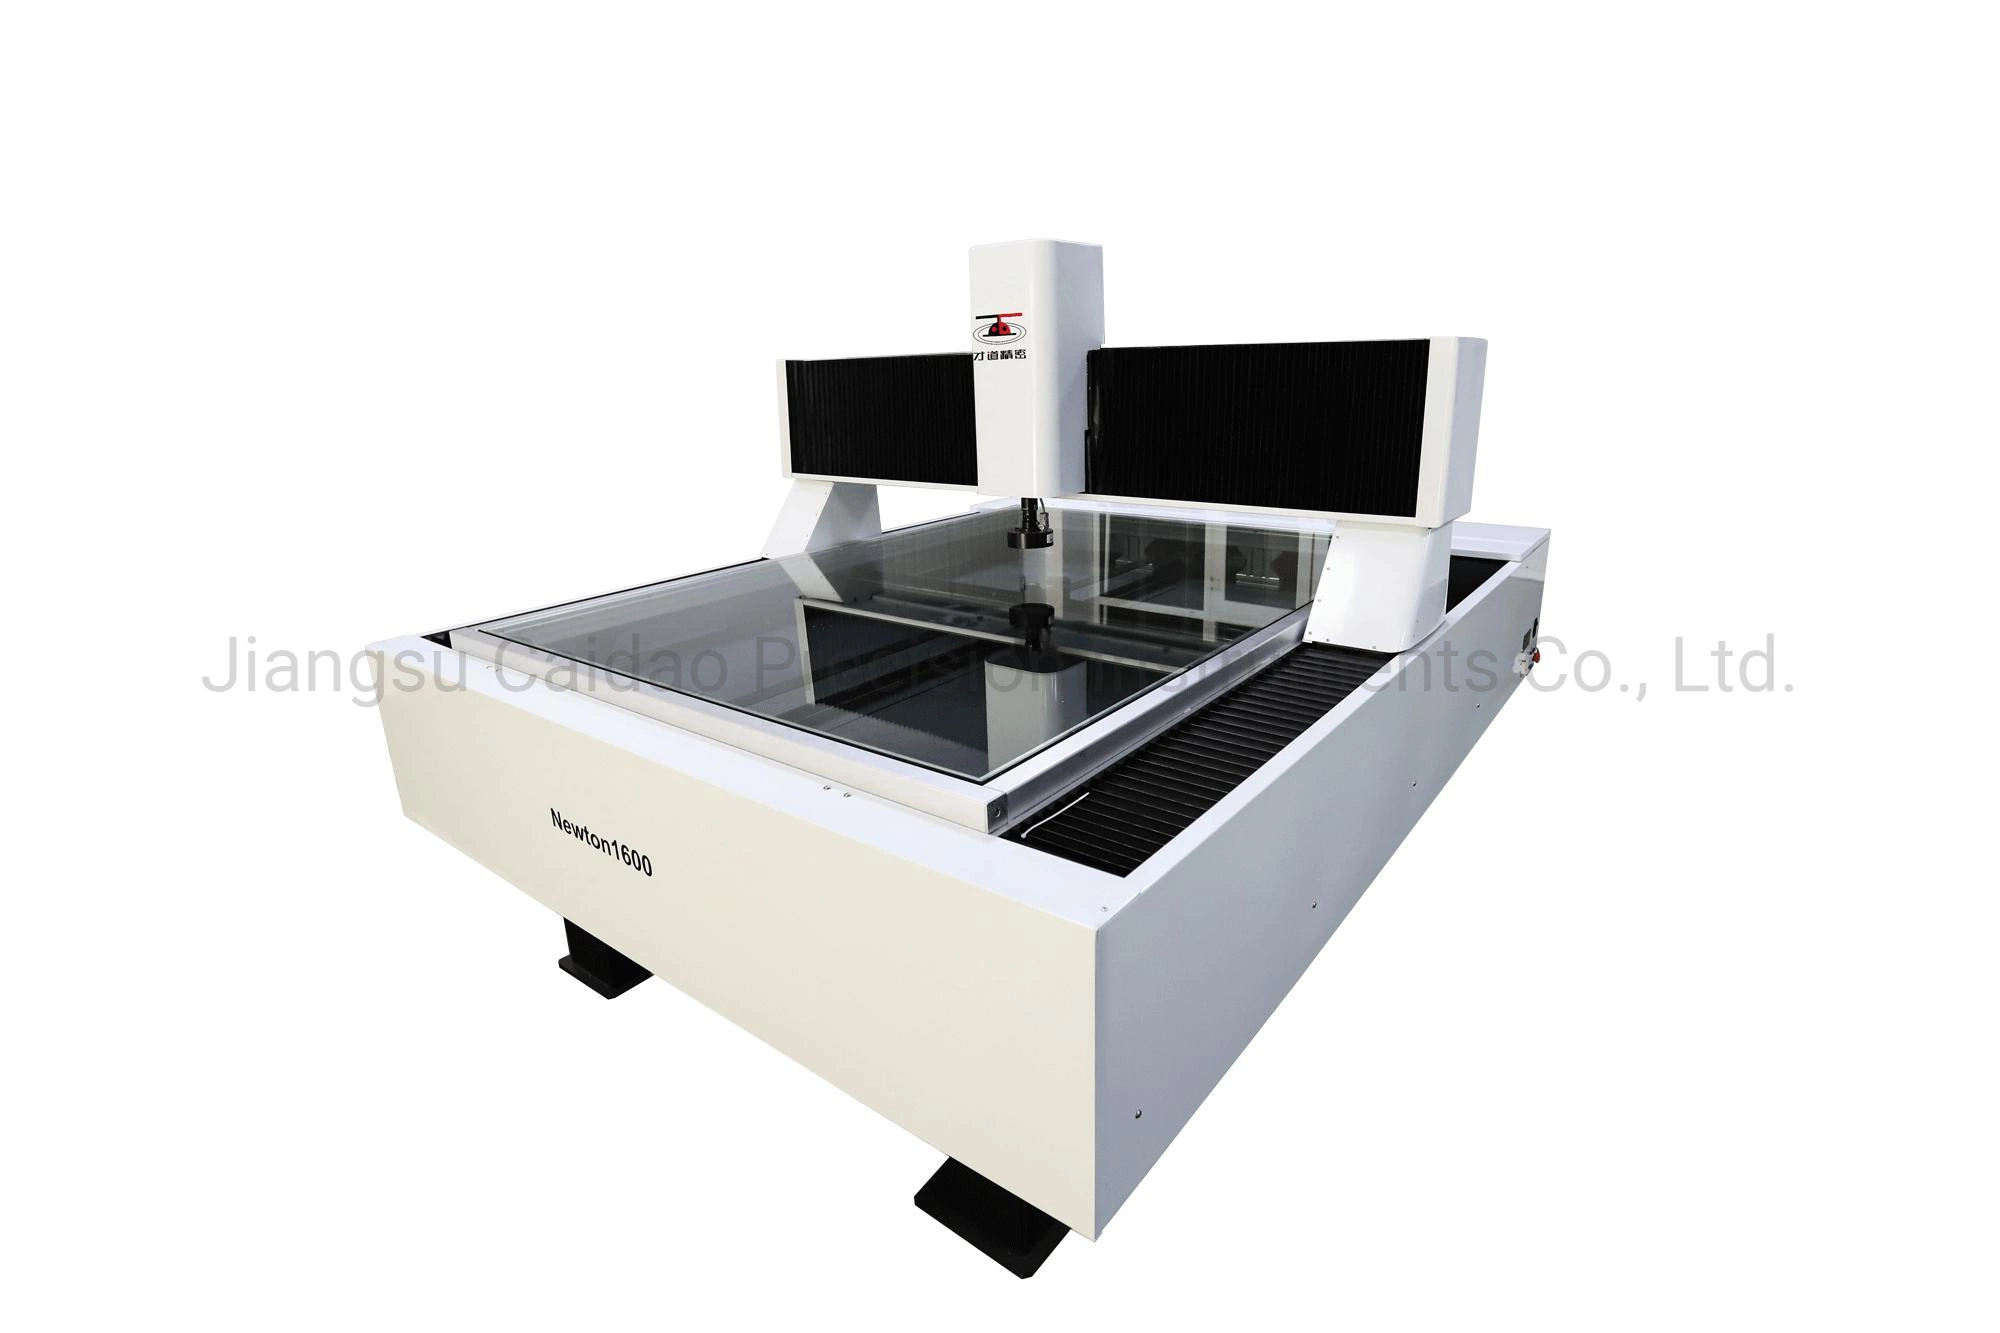 Vision Inspection Machine for 2D Measuring and OLED Measuring Newton 1000